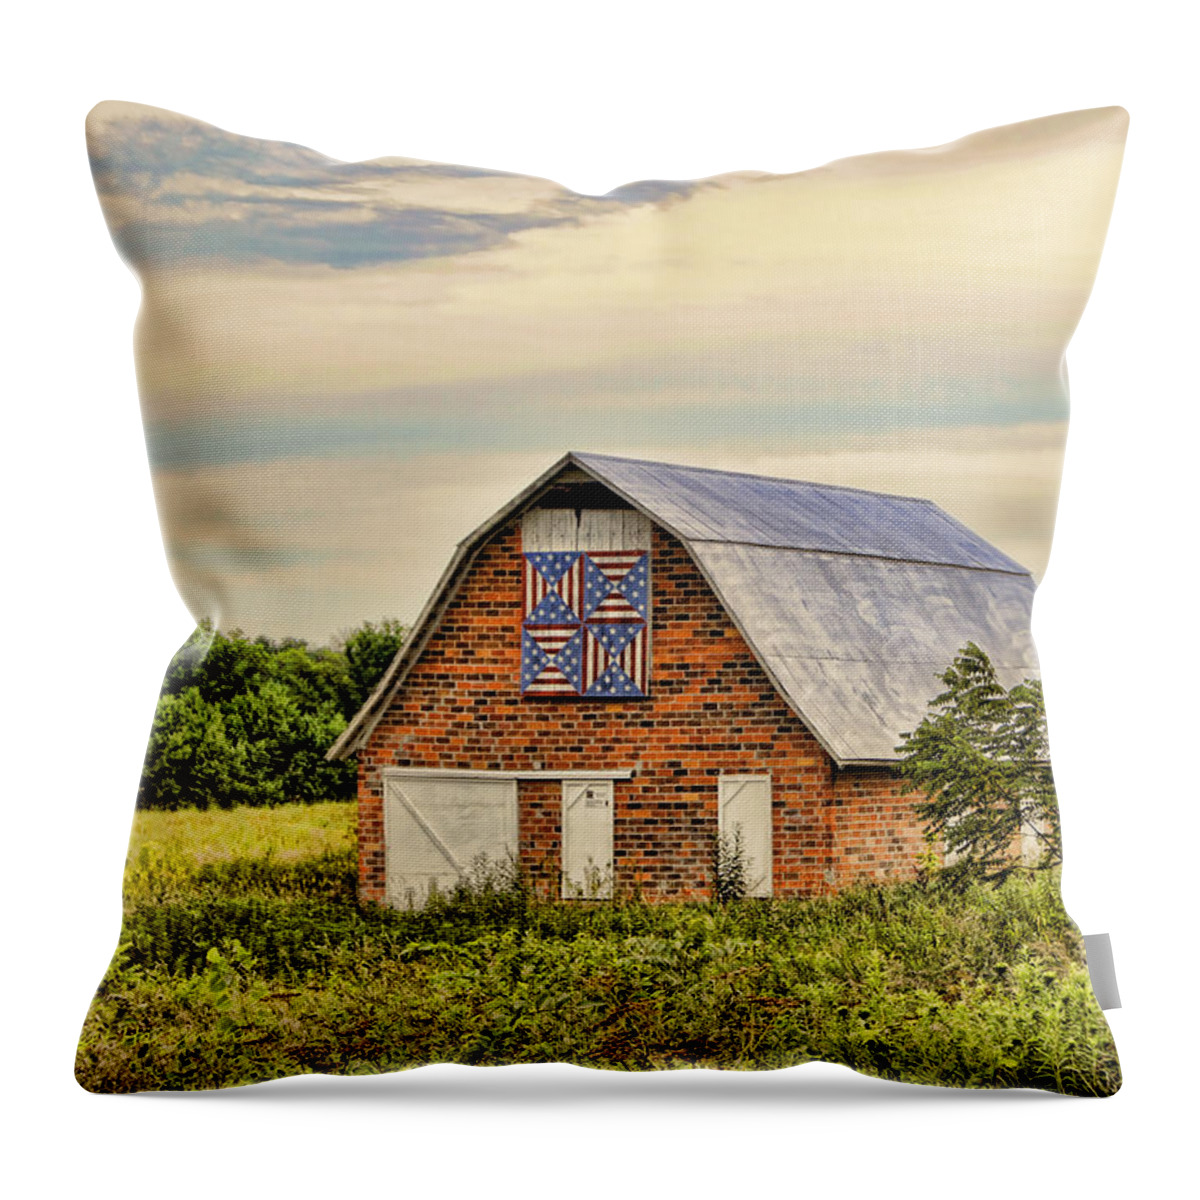 Quilt Throw Pillow featuring the photograph Electric Fan Quilt Barn by Cricket Hackmann